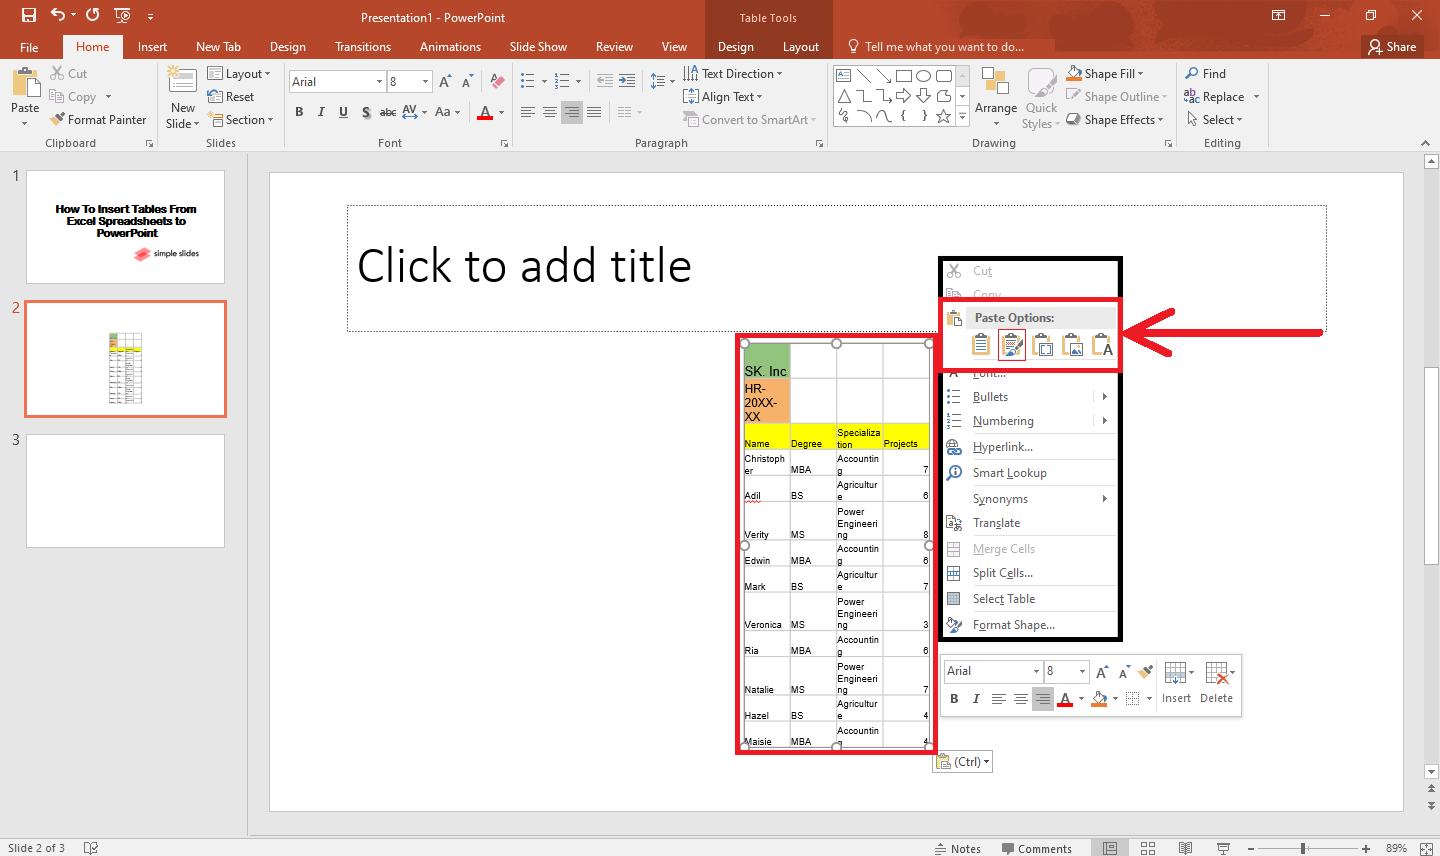 Right-click the slide and choose paste, to insert your excel spreadsheet data.